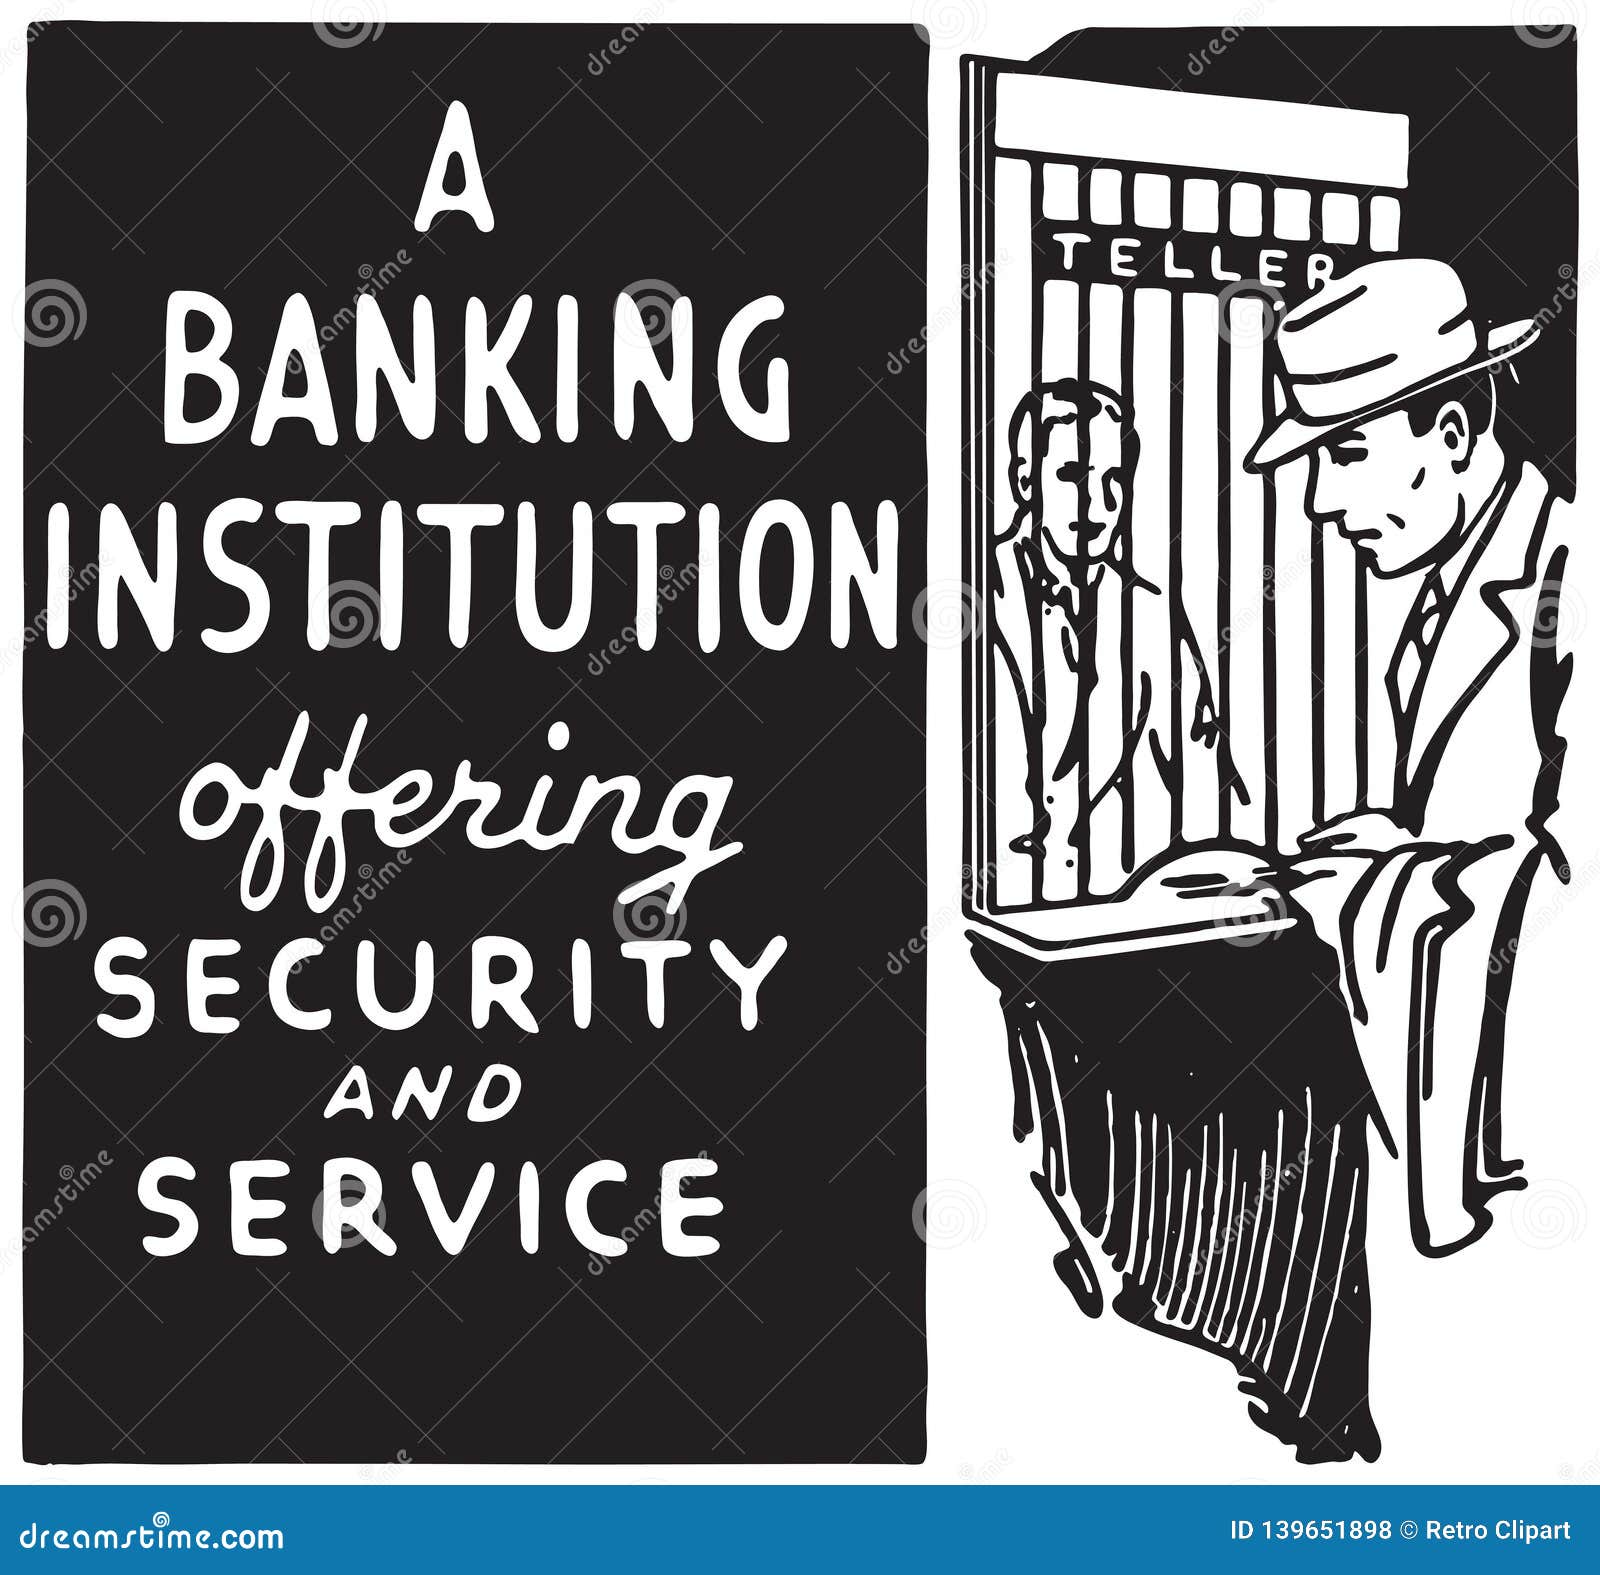 a banking institution